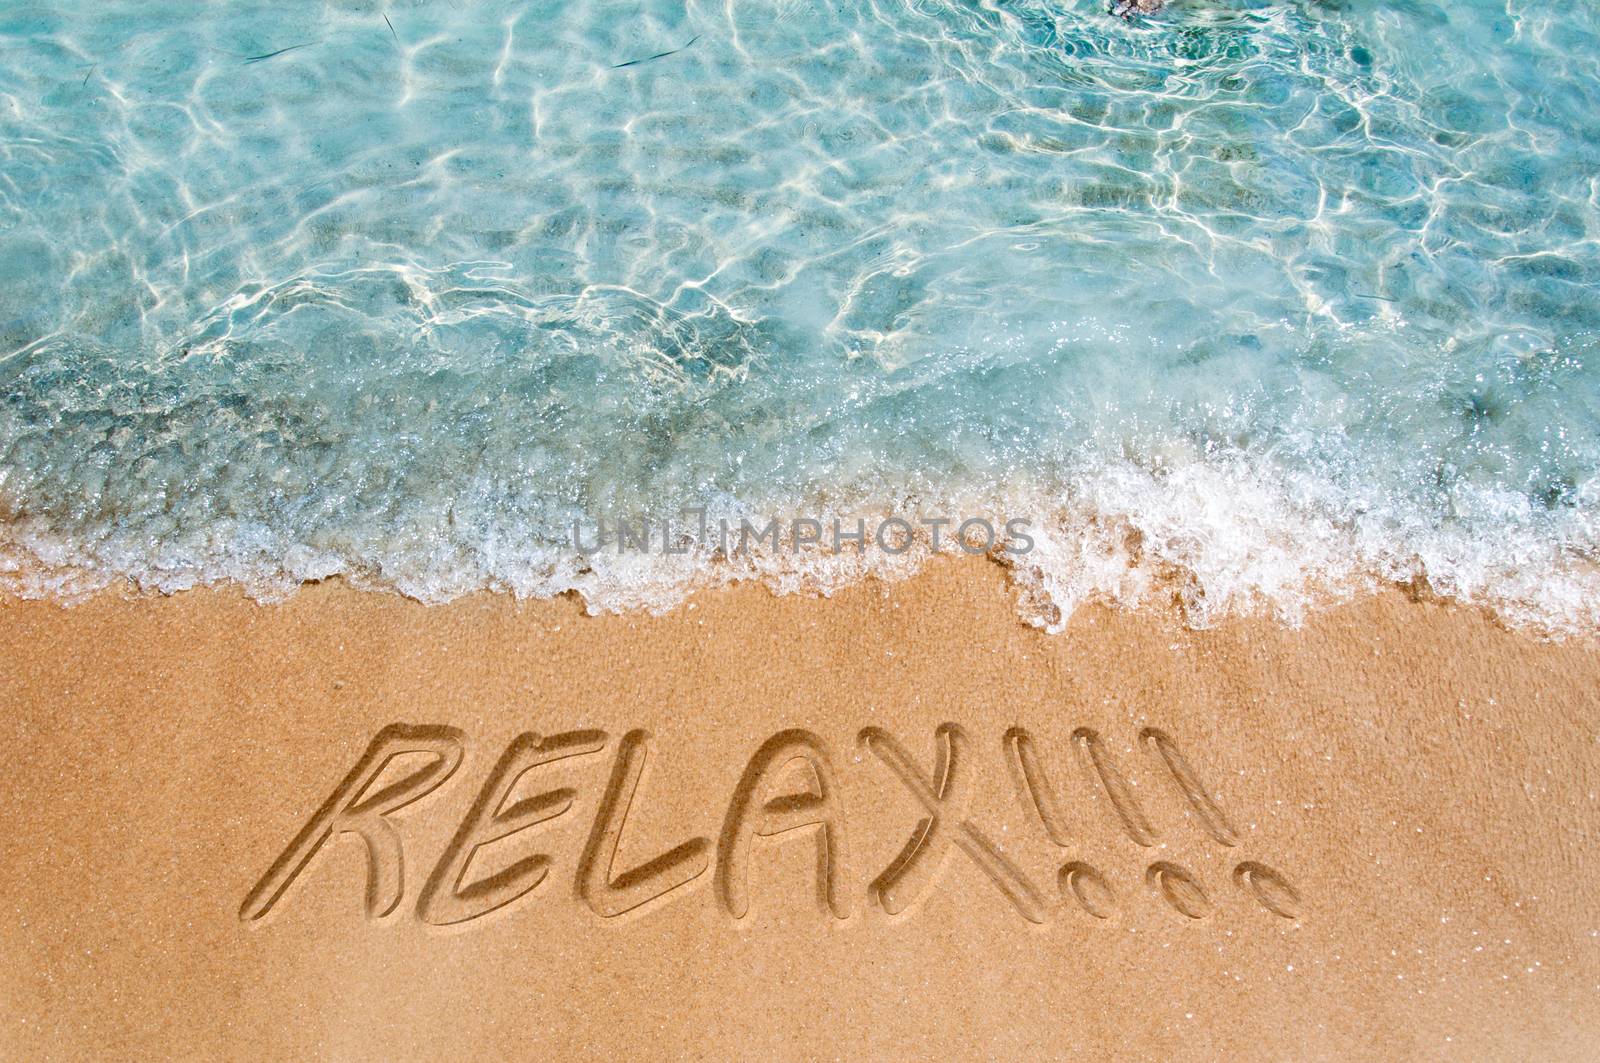 Relax concept by badmanproduction